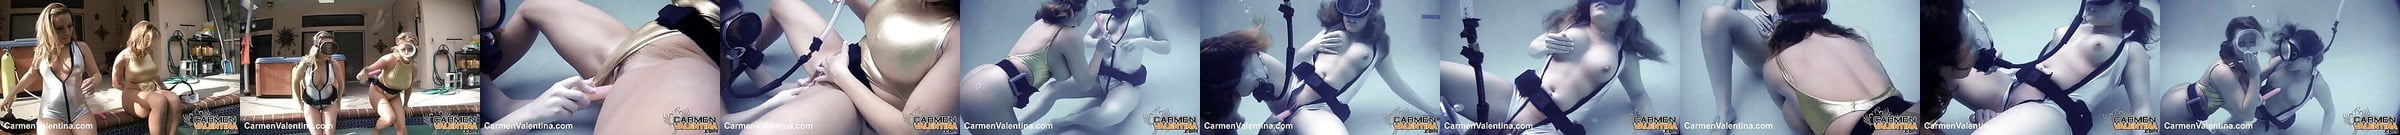 Underwater Fetish Fun At Clips4sale Com Porn 49 Xhamster